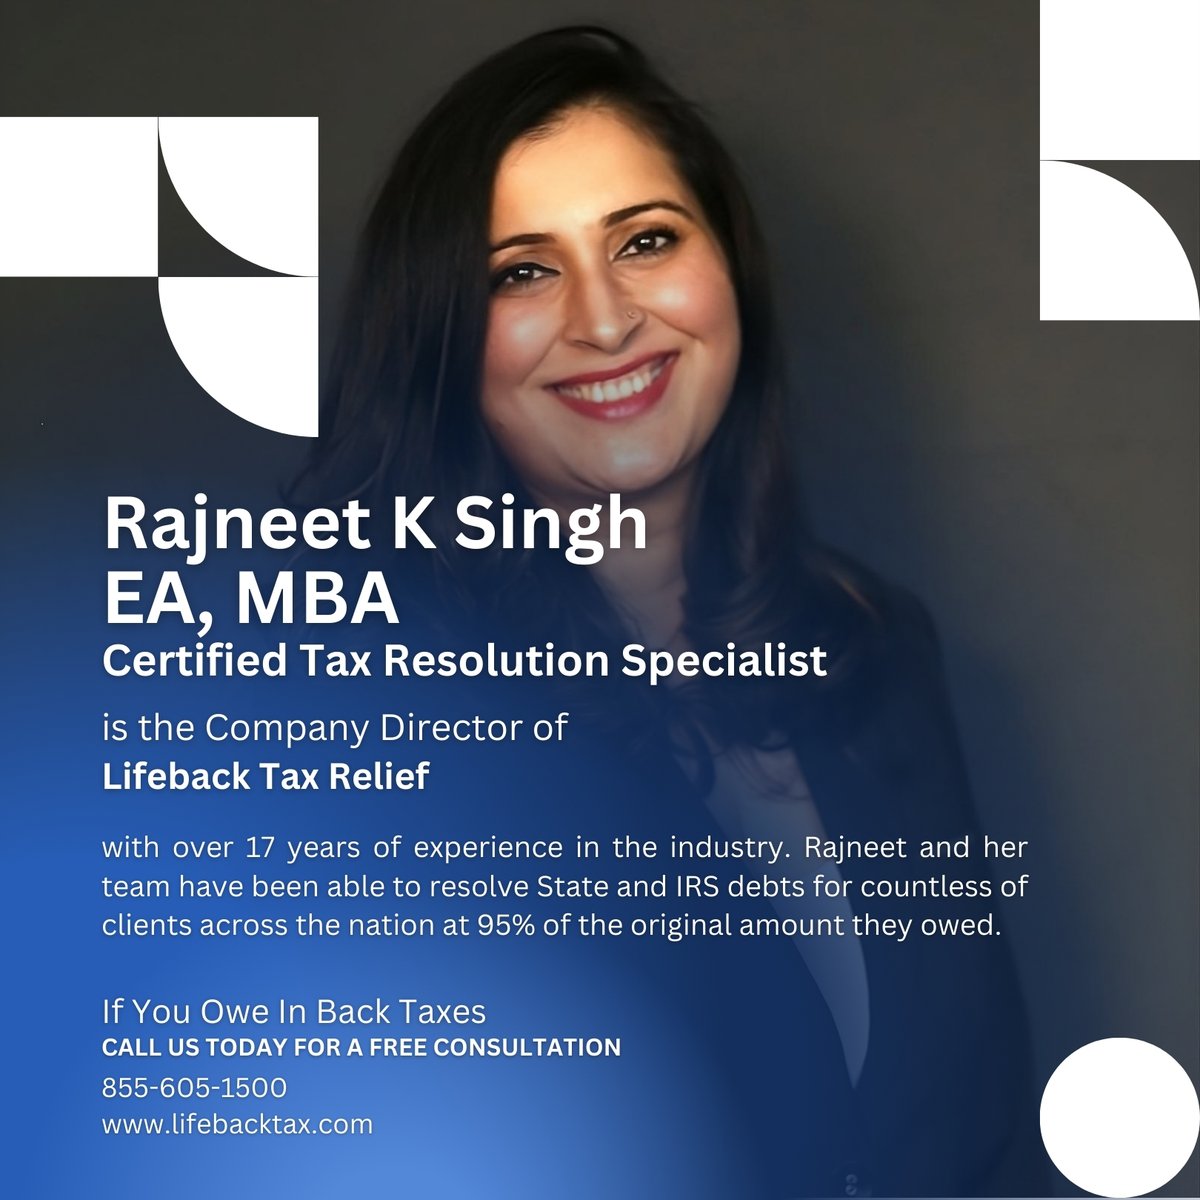 'Struggling with back taxes? Look no further! 💰 With over 17 years of expertise, Rajneet K Singh and her team at Lifeback Tax Relief have helped countless clients. Don't let tax stress weigh you   

#taxrelief #irs #experthelp #FinancialFreedom #TaxSeason #fyp #viral #taxtips